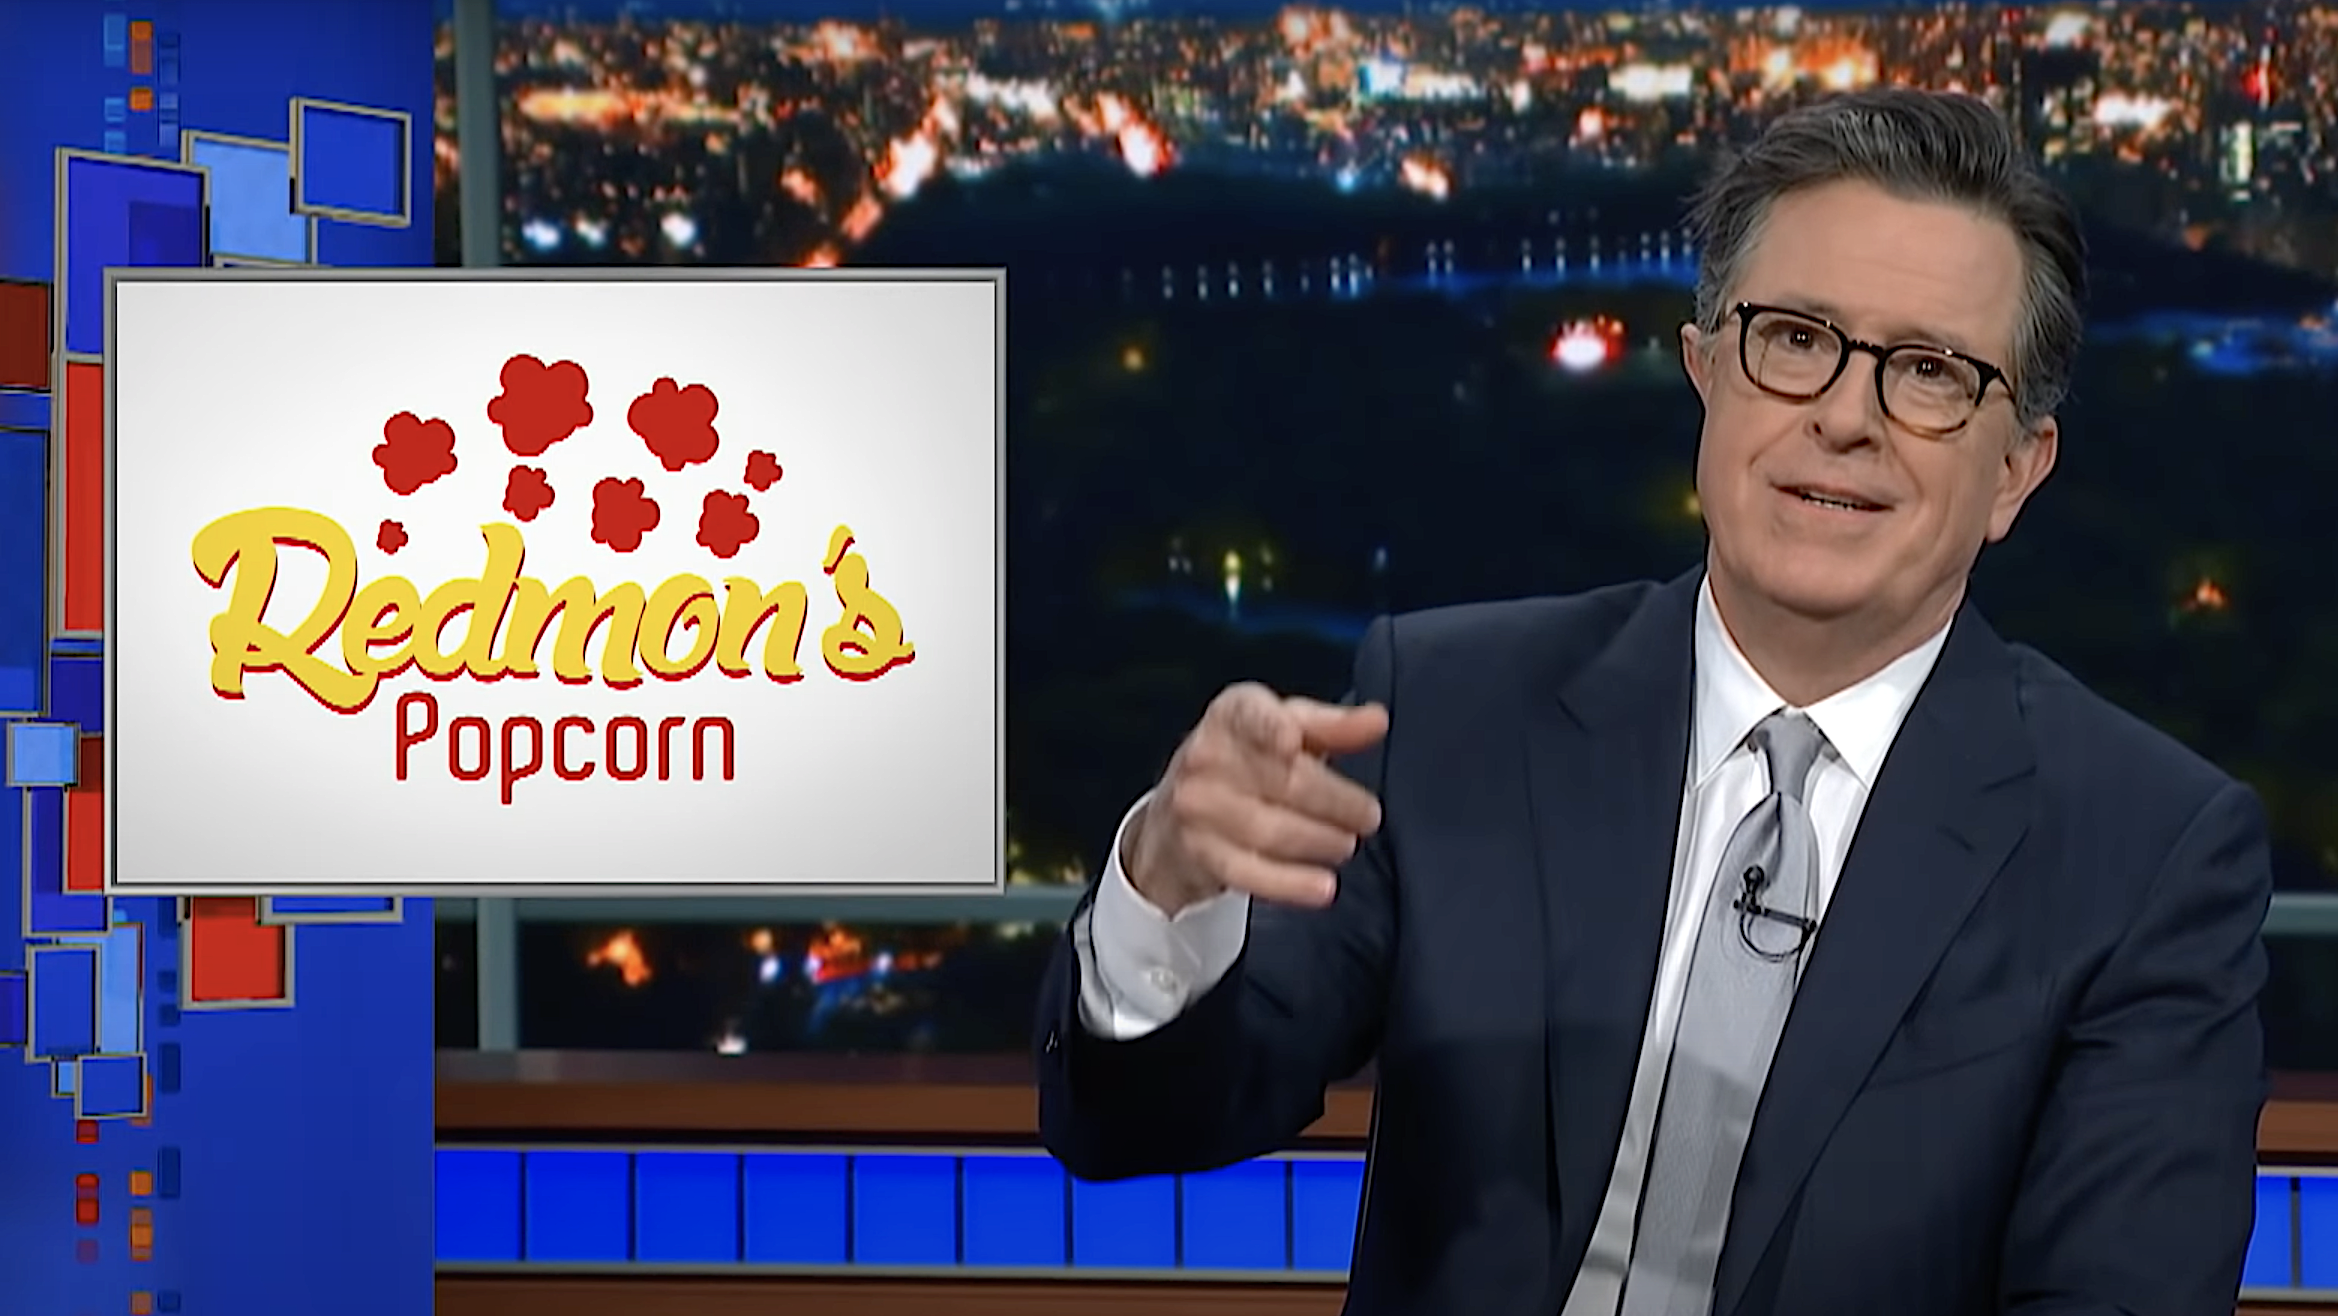 Stephen Colbert hijacks another CBS show’s Times Square billboard to save a small business